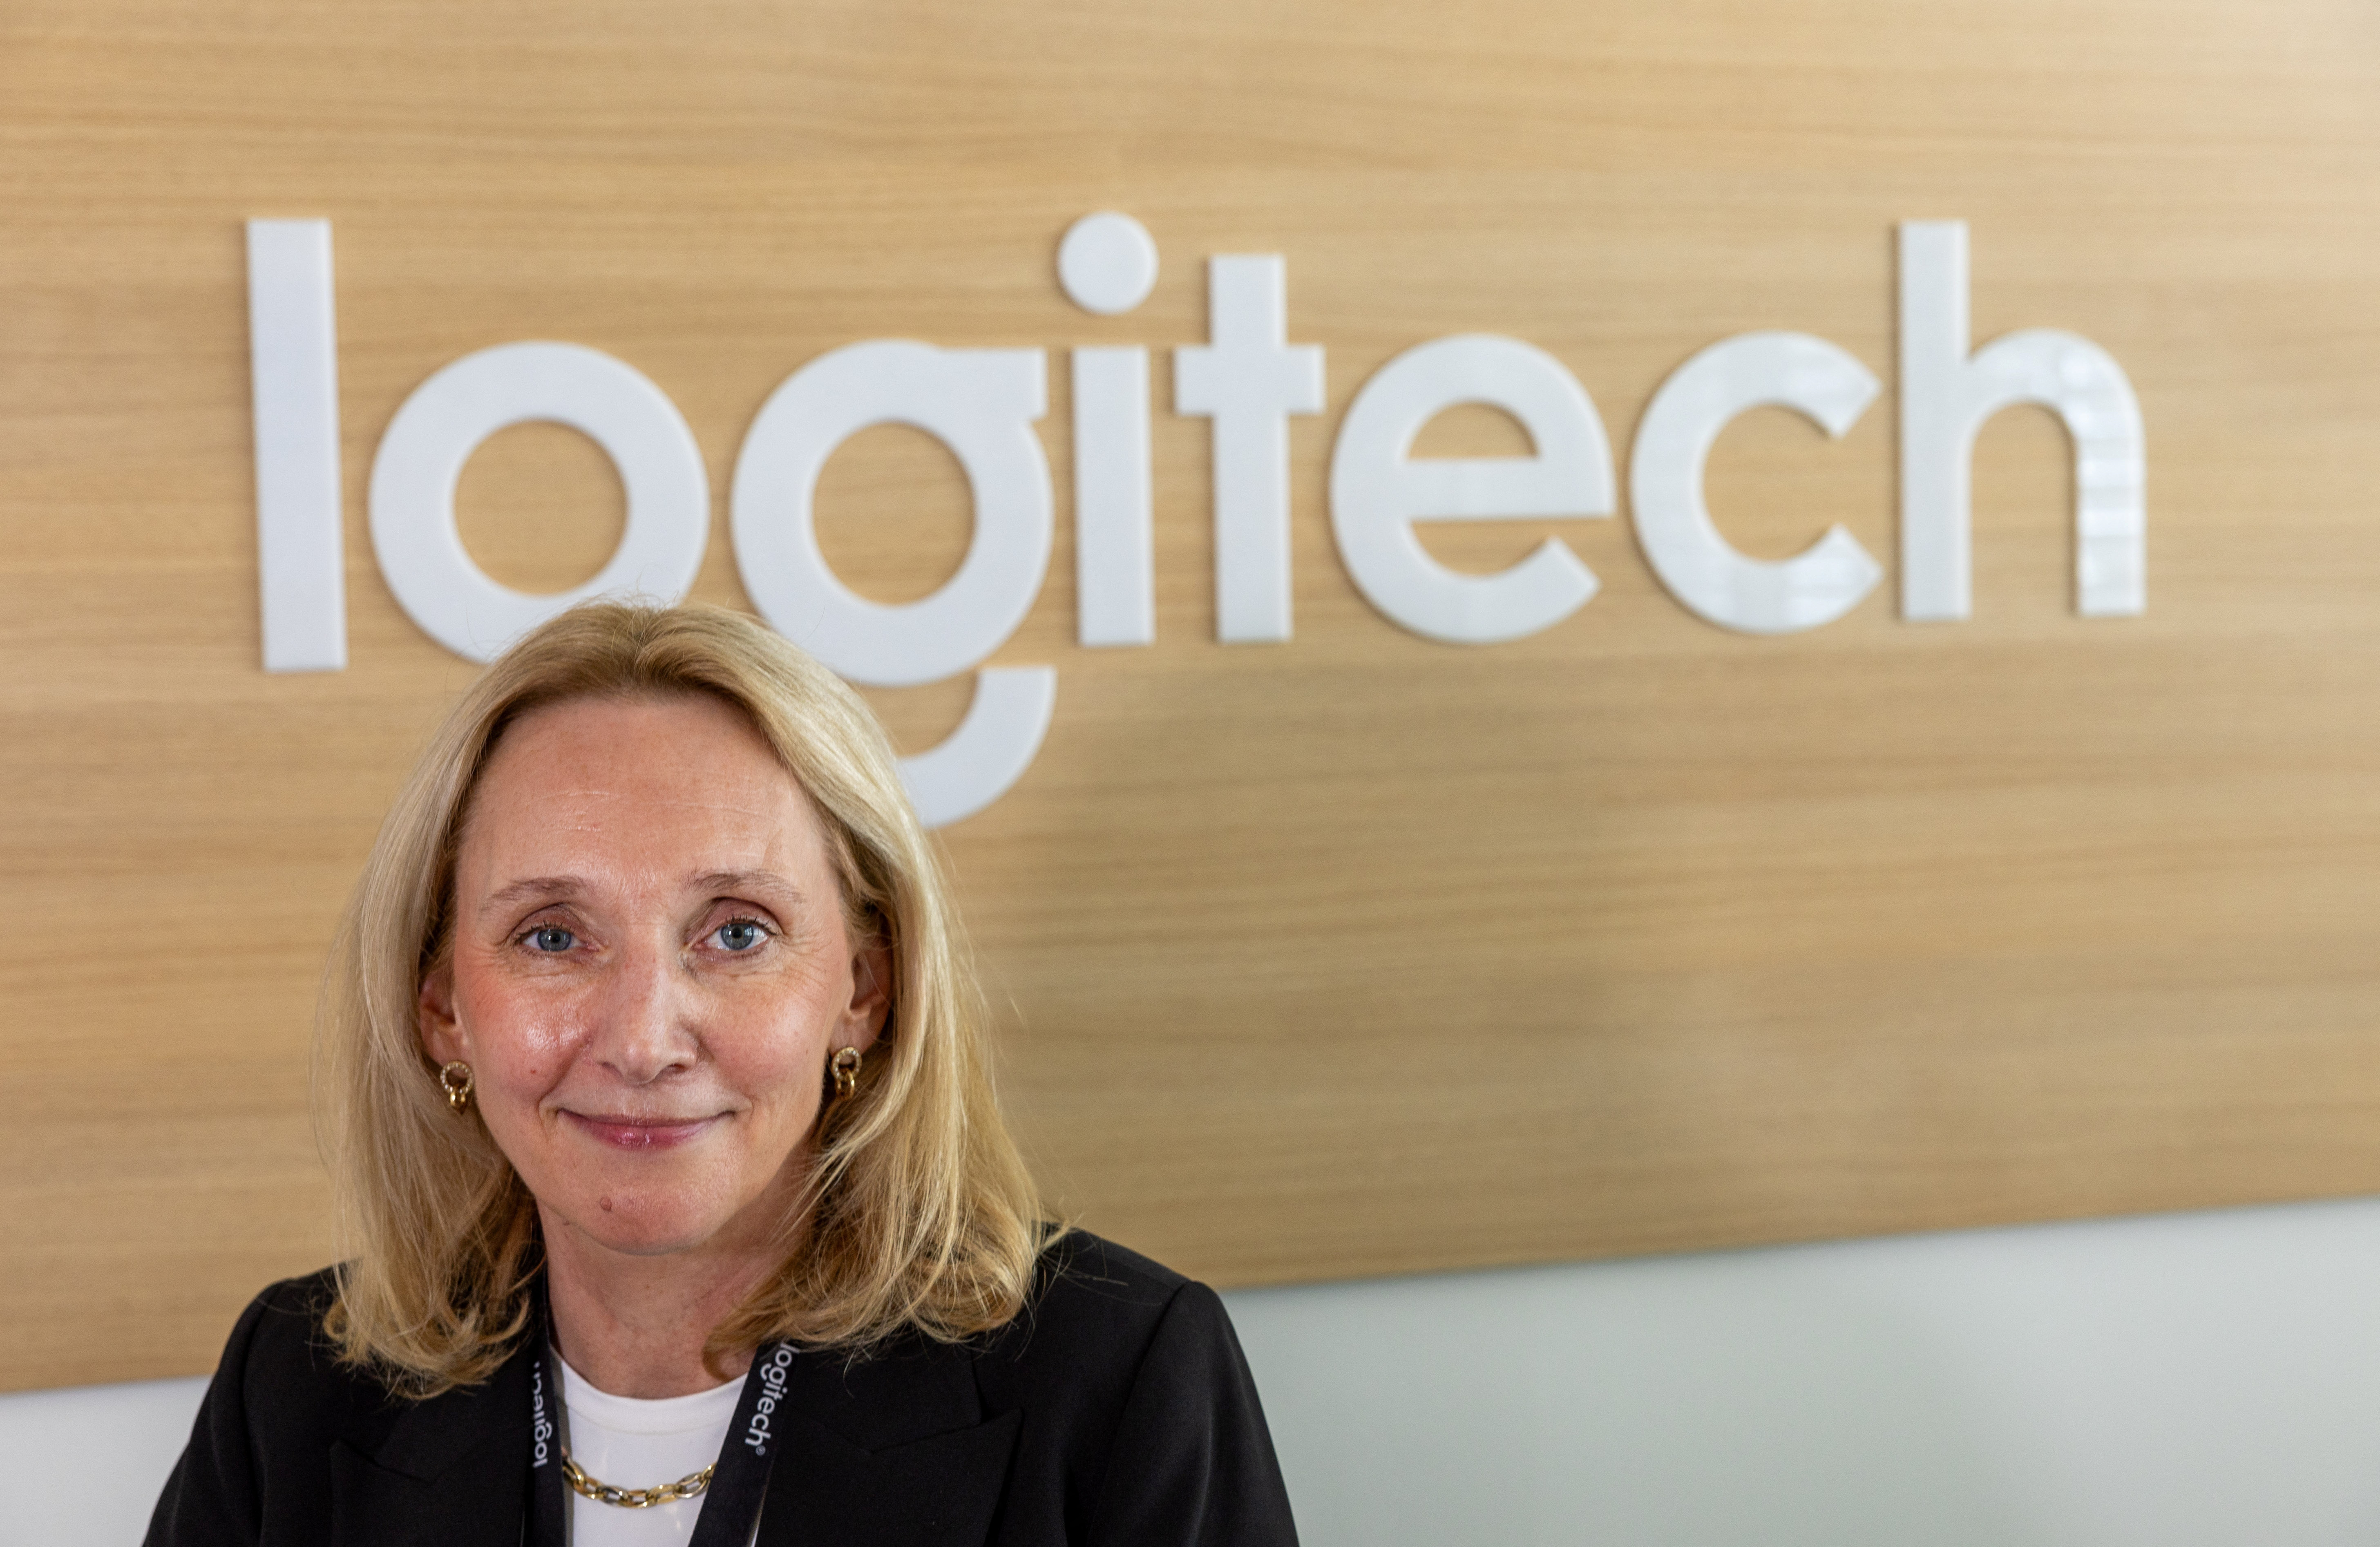 Logitech CEO Hanneke Faber interview with Reuters in Ecublens